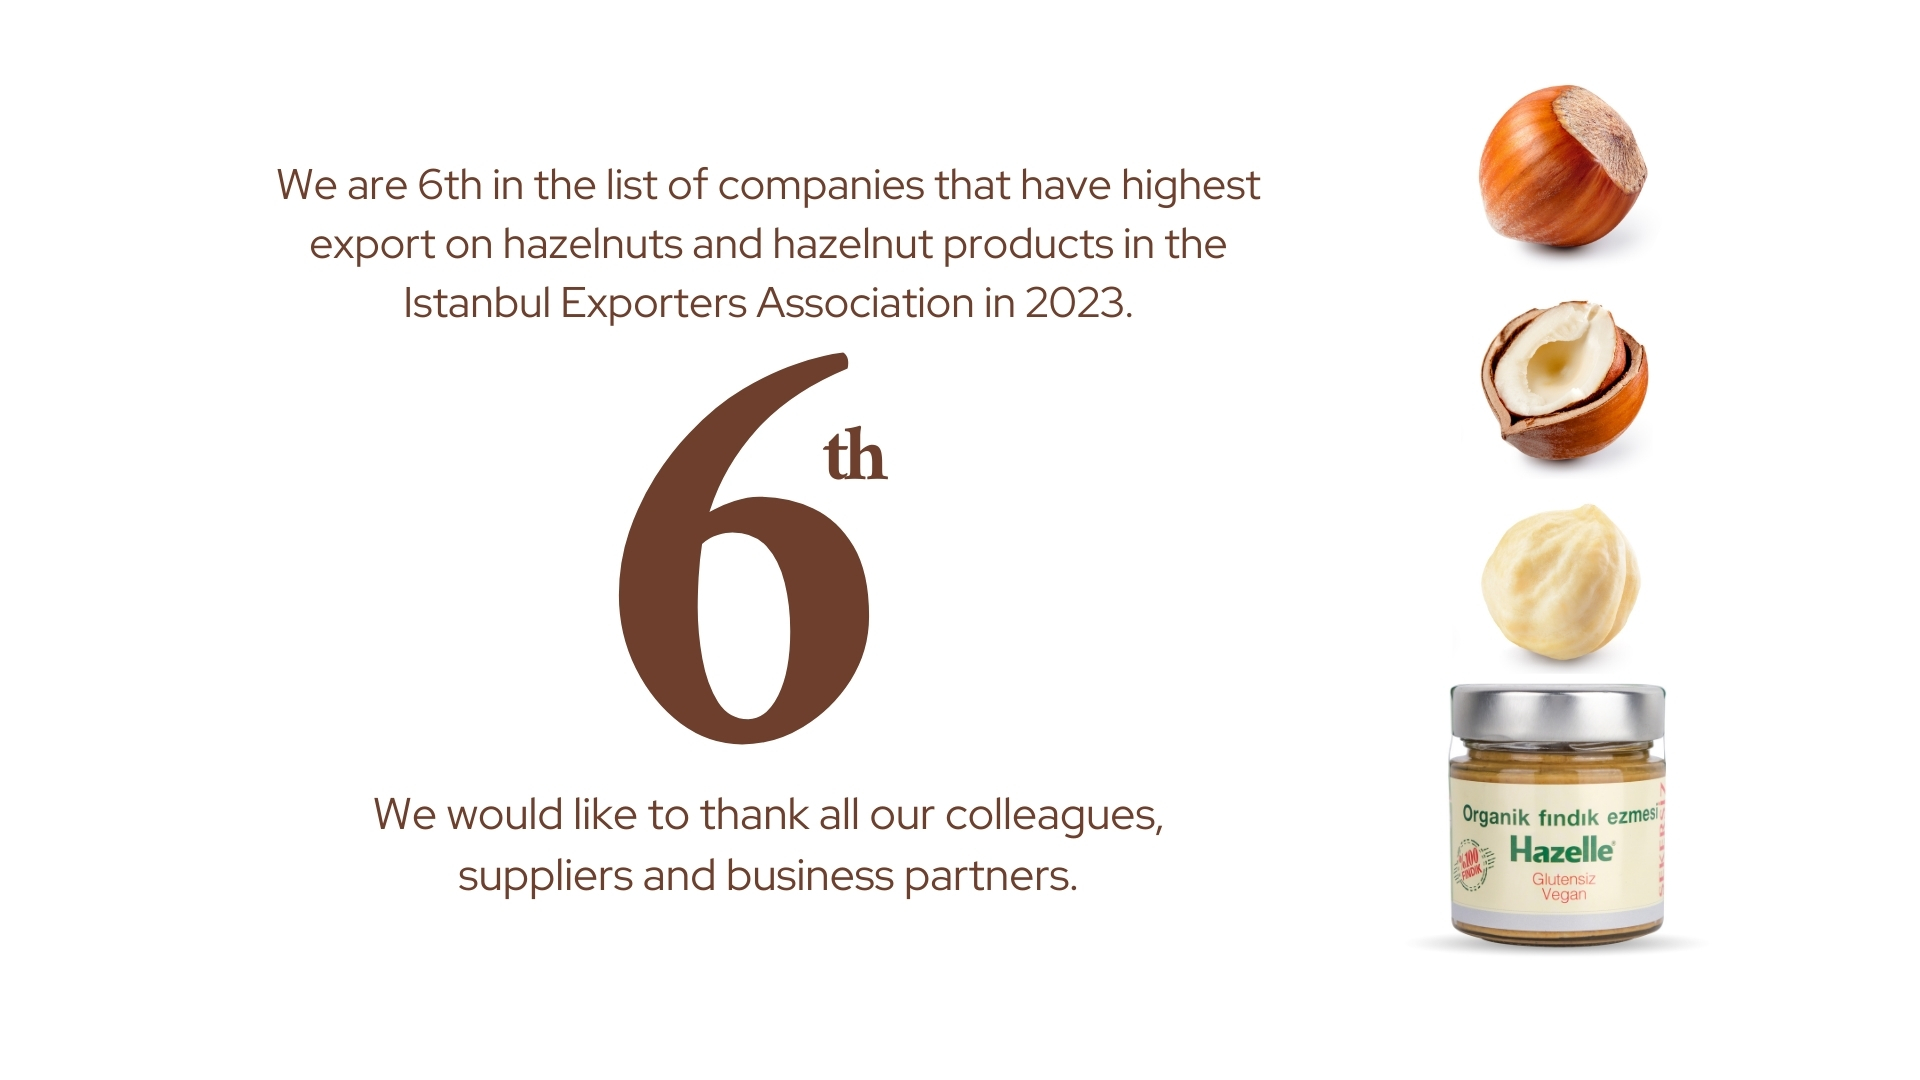 We are 6th in the list of companies that have highest export on hazelnuts and hazelnut products.